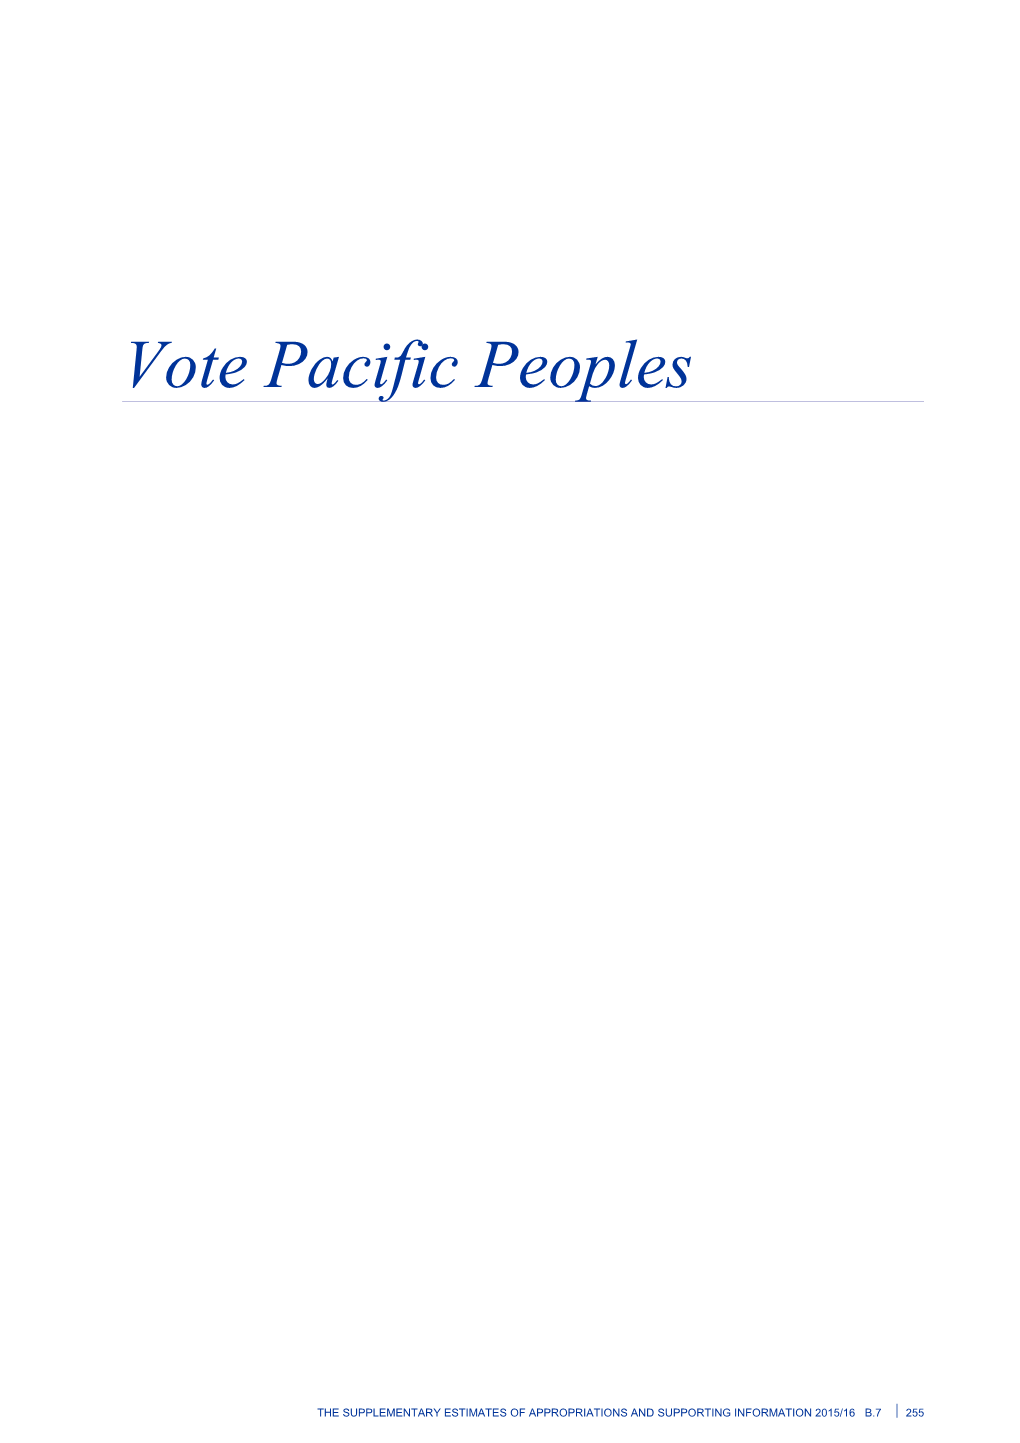 Vote Pacific People - Supplementary Estimates of Appropriations 2015/16 - Budget 2016